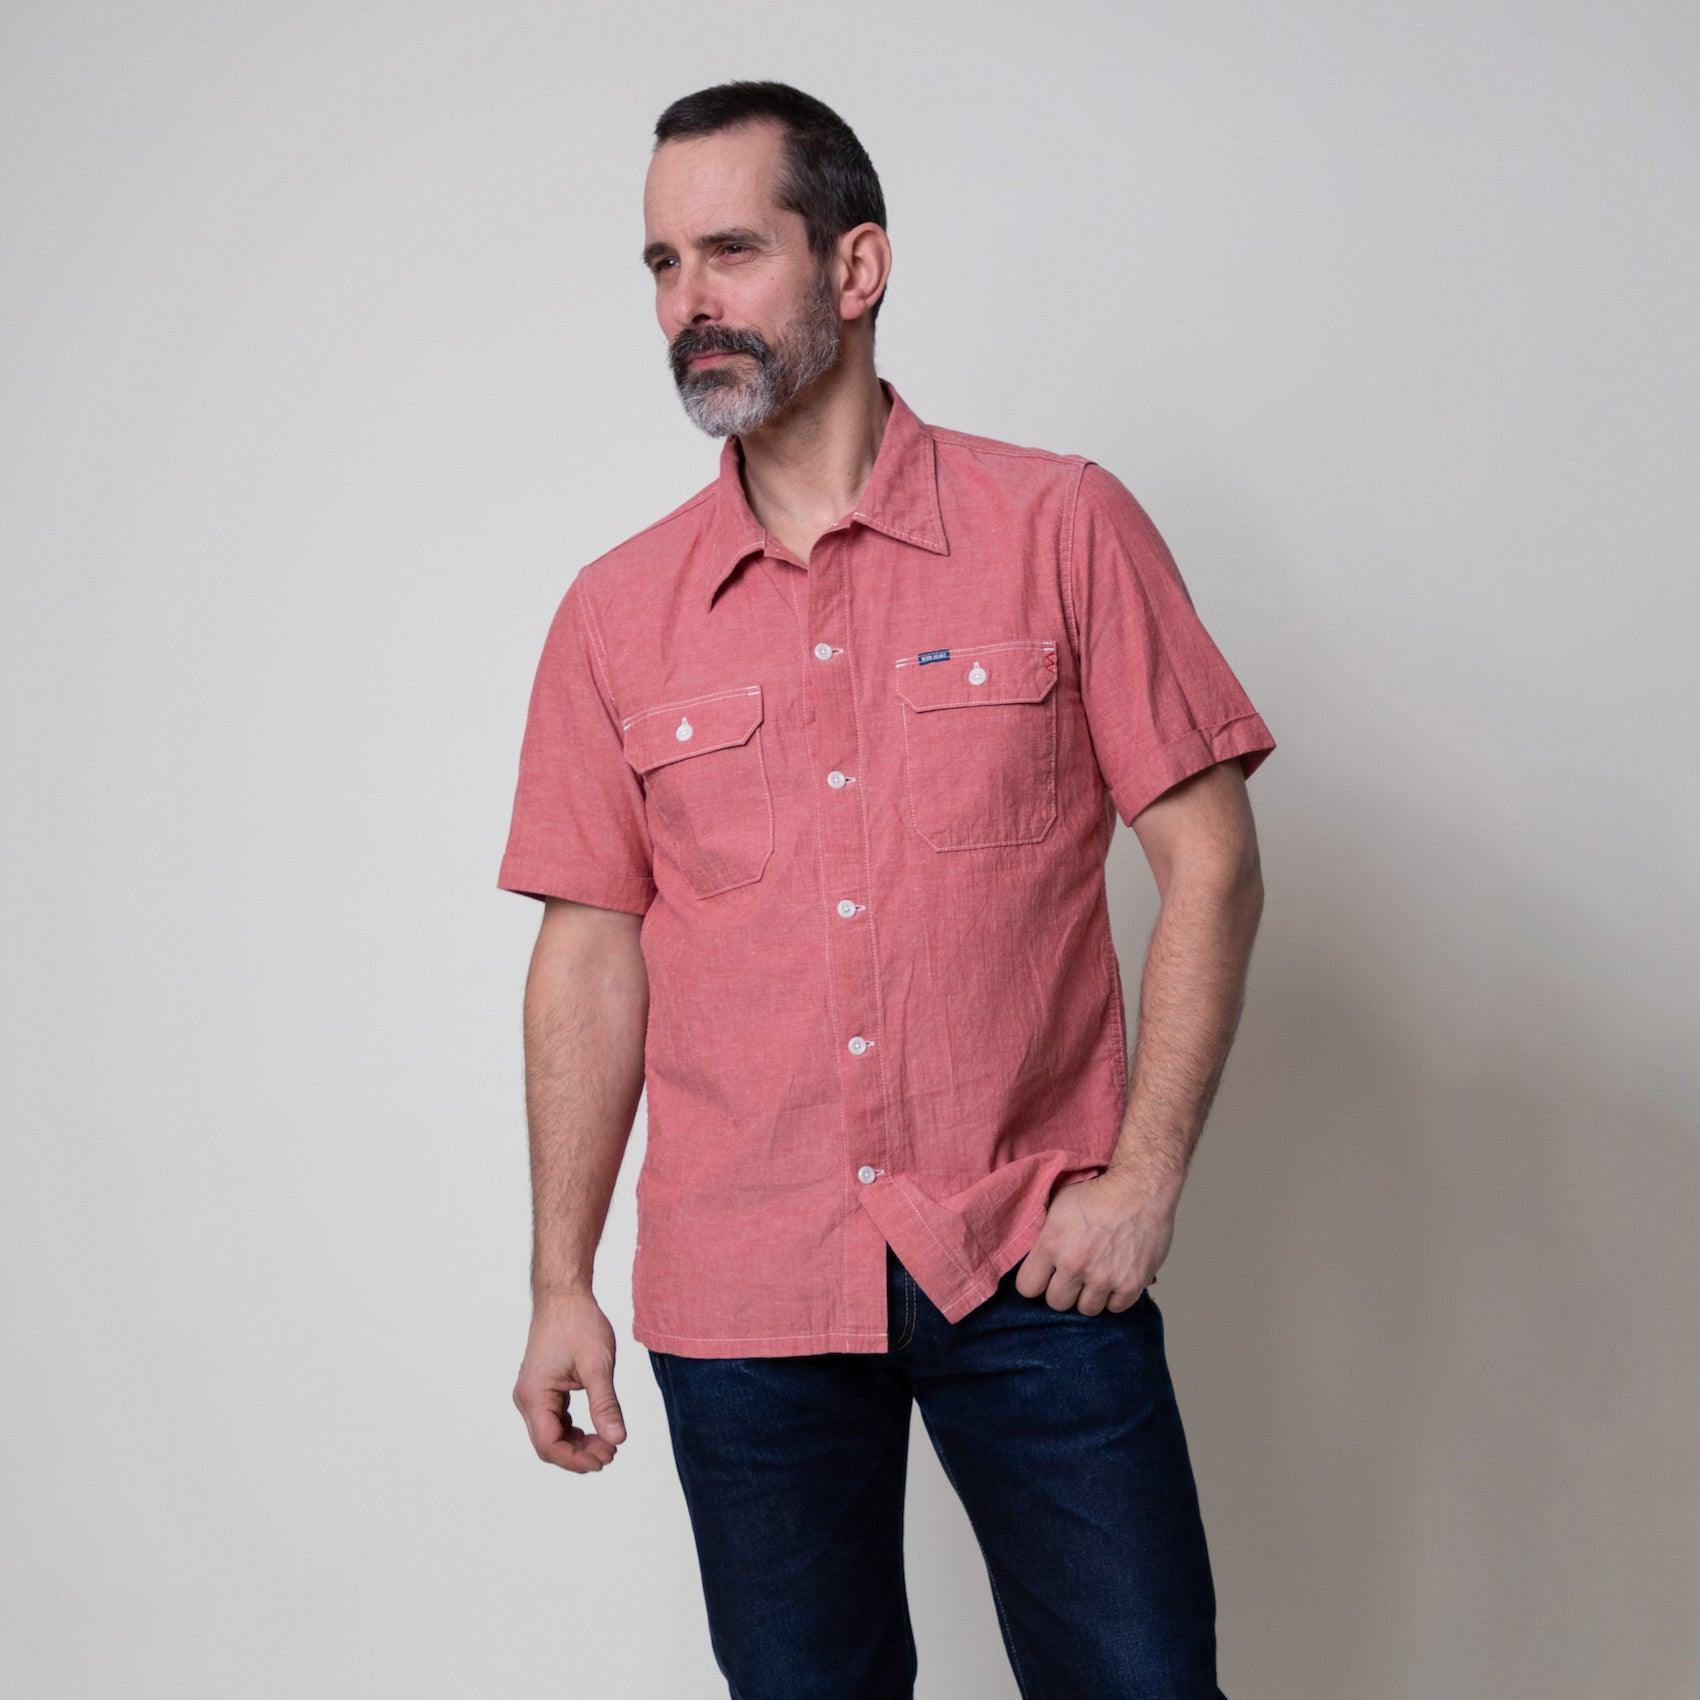 Image showing the IHSH-388-RED - 4oz Short Sleeved Summer Shirt - Red which is a Shirts described by the following info SS24 and sold on the IRON HEART GERMANY online store